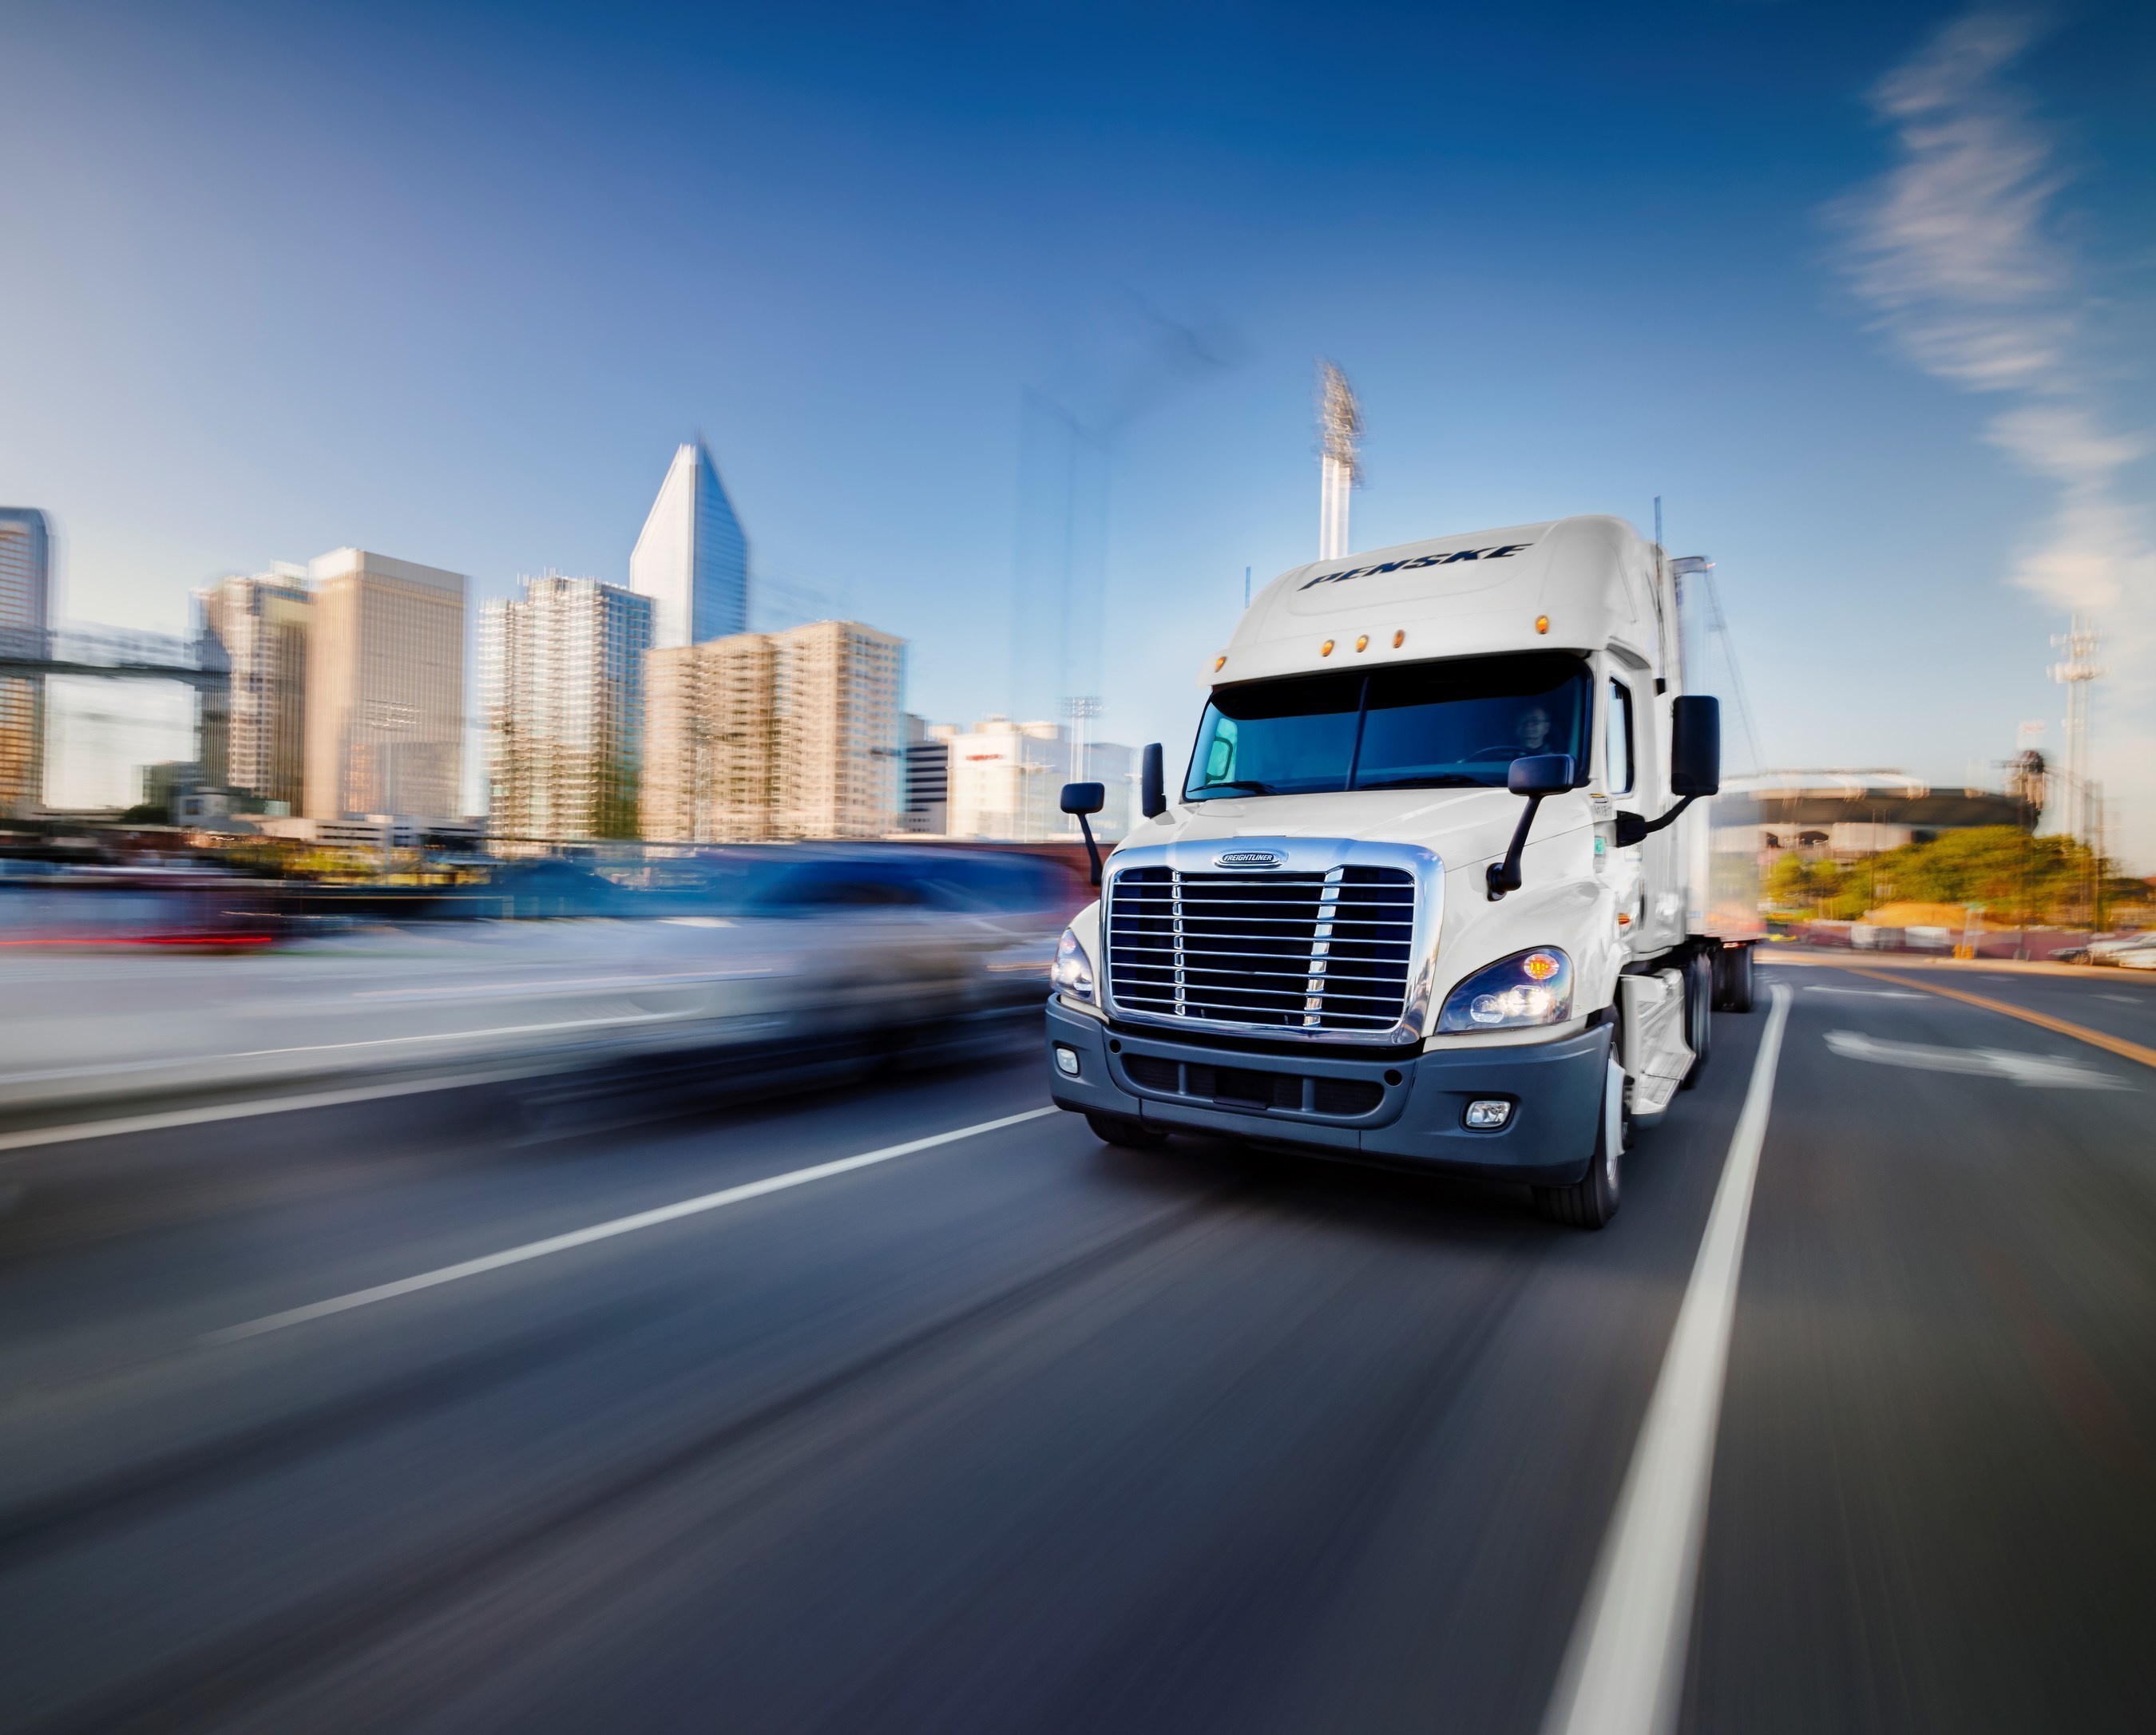 Penske Logistics announced it has reached an agreement to acquire Transfreight North America, from Mitsui & Co., Ltd.